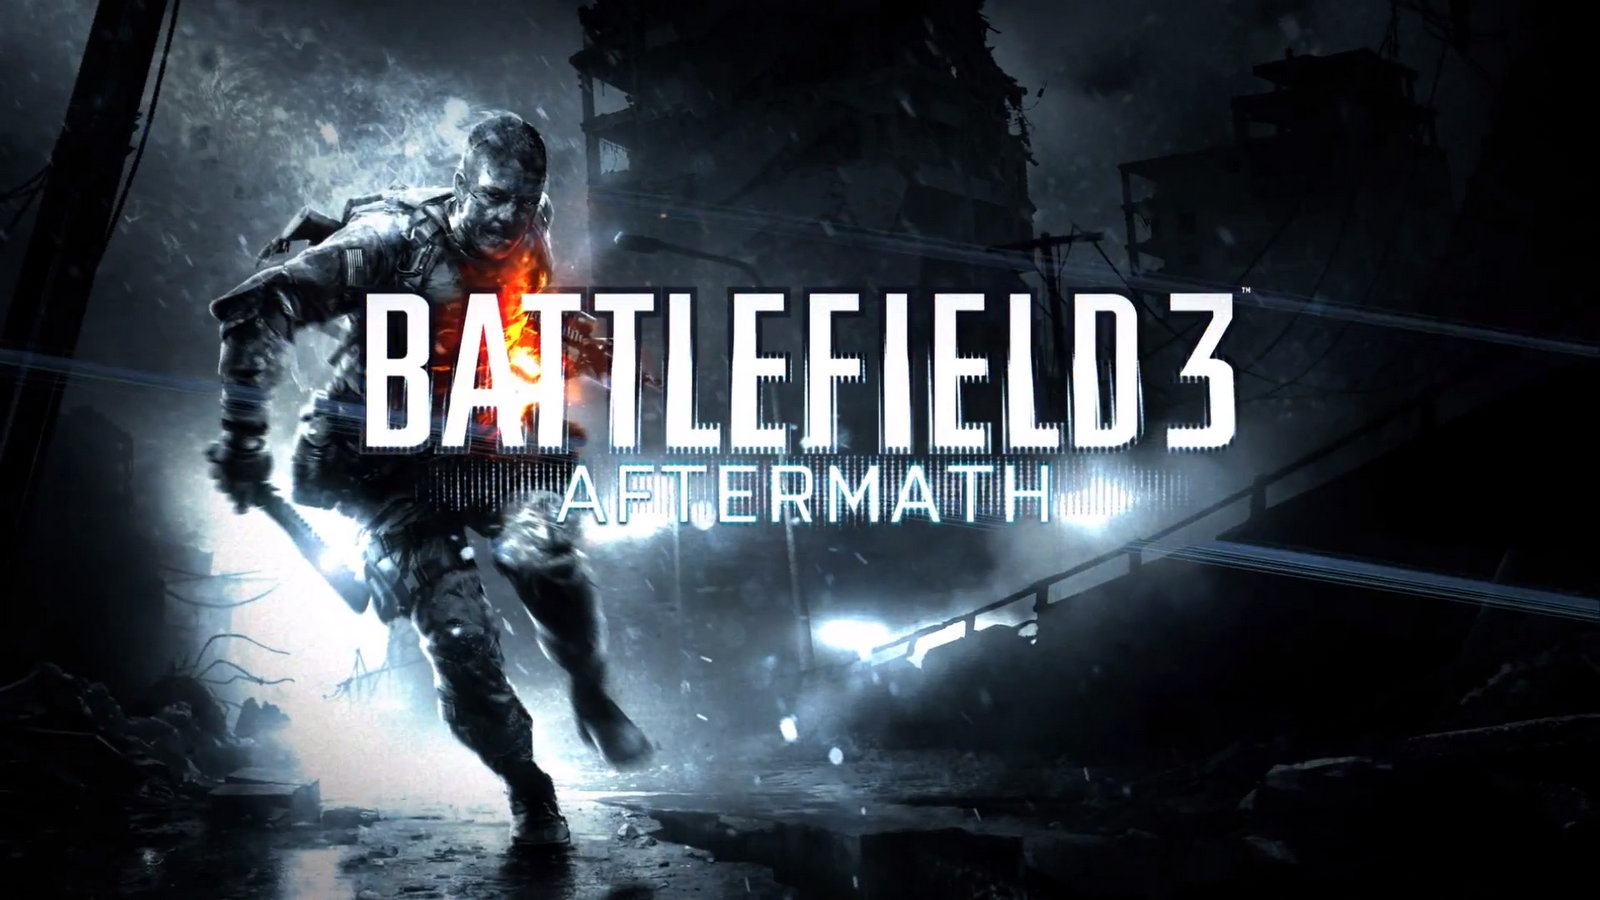 Battlefield 3 Aftermath Video Game HD Wallpapers Download HD Video